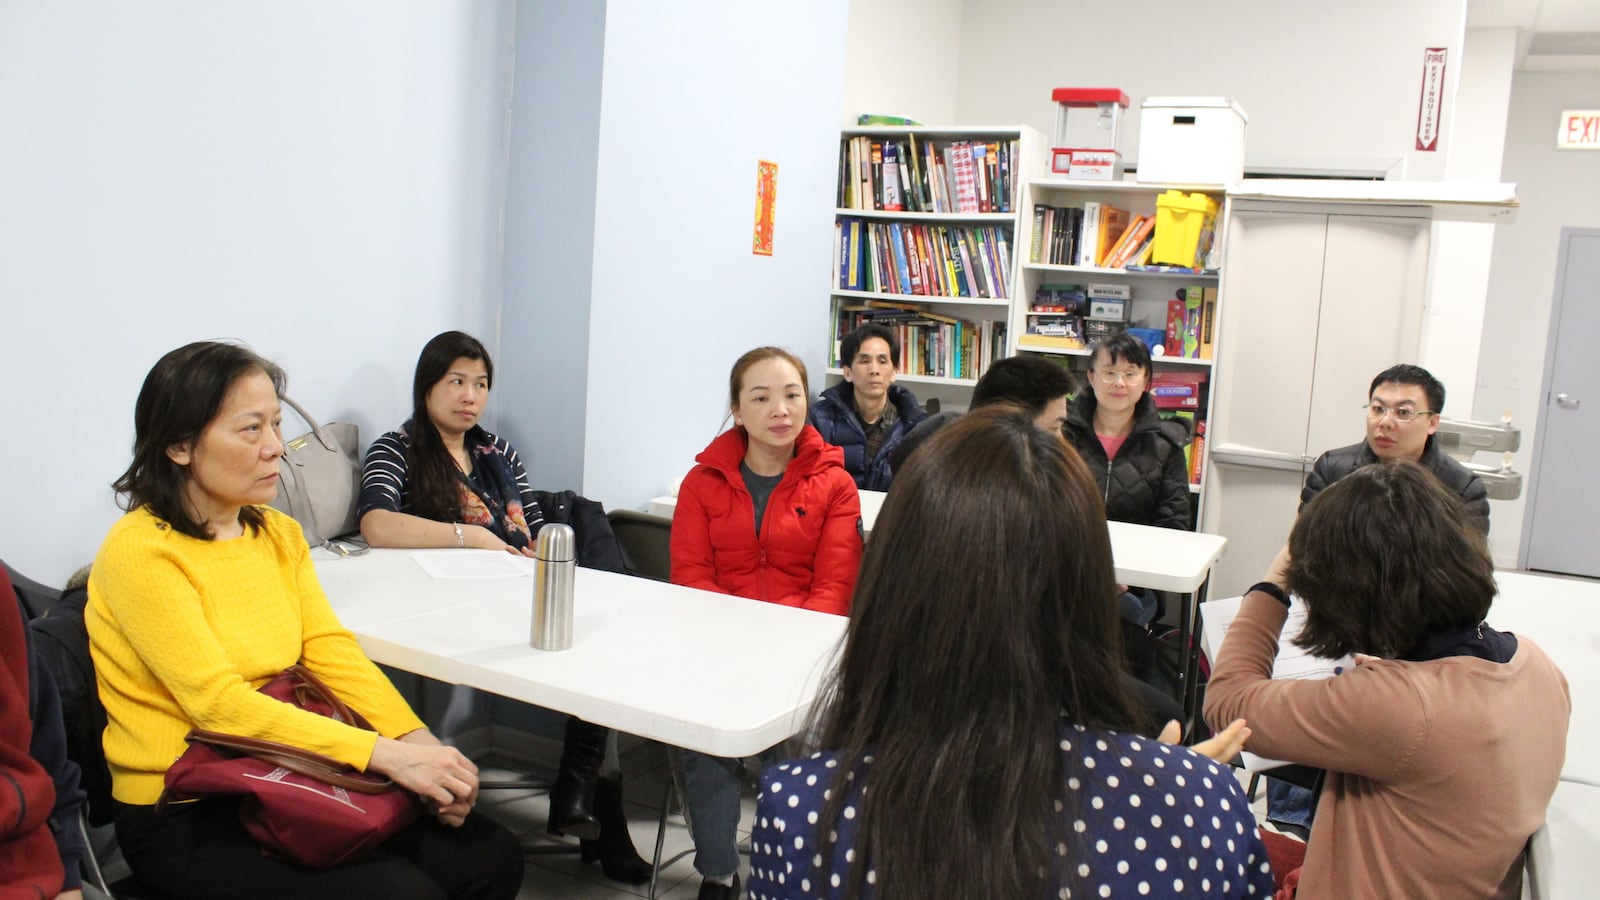 Chalkbeat Chicago recently visited Chinatown and sat down with parents, Local School Council members, and community residents to talk about schools.